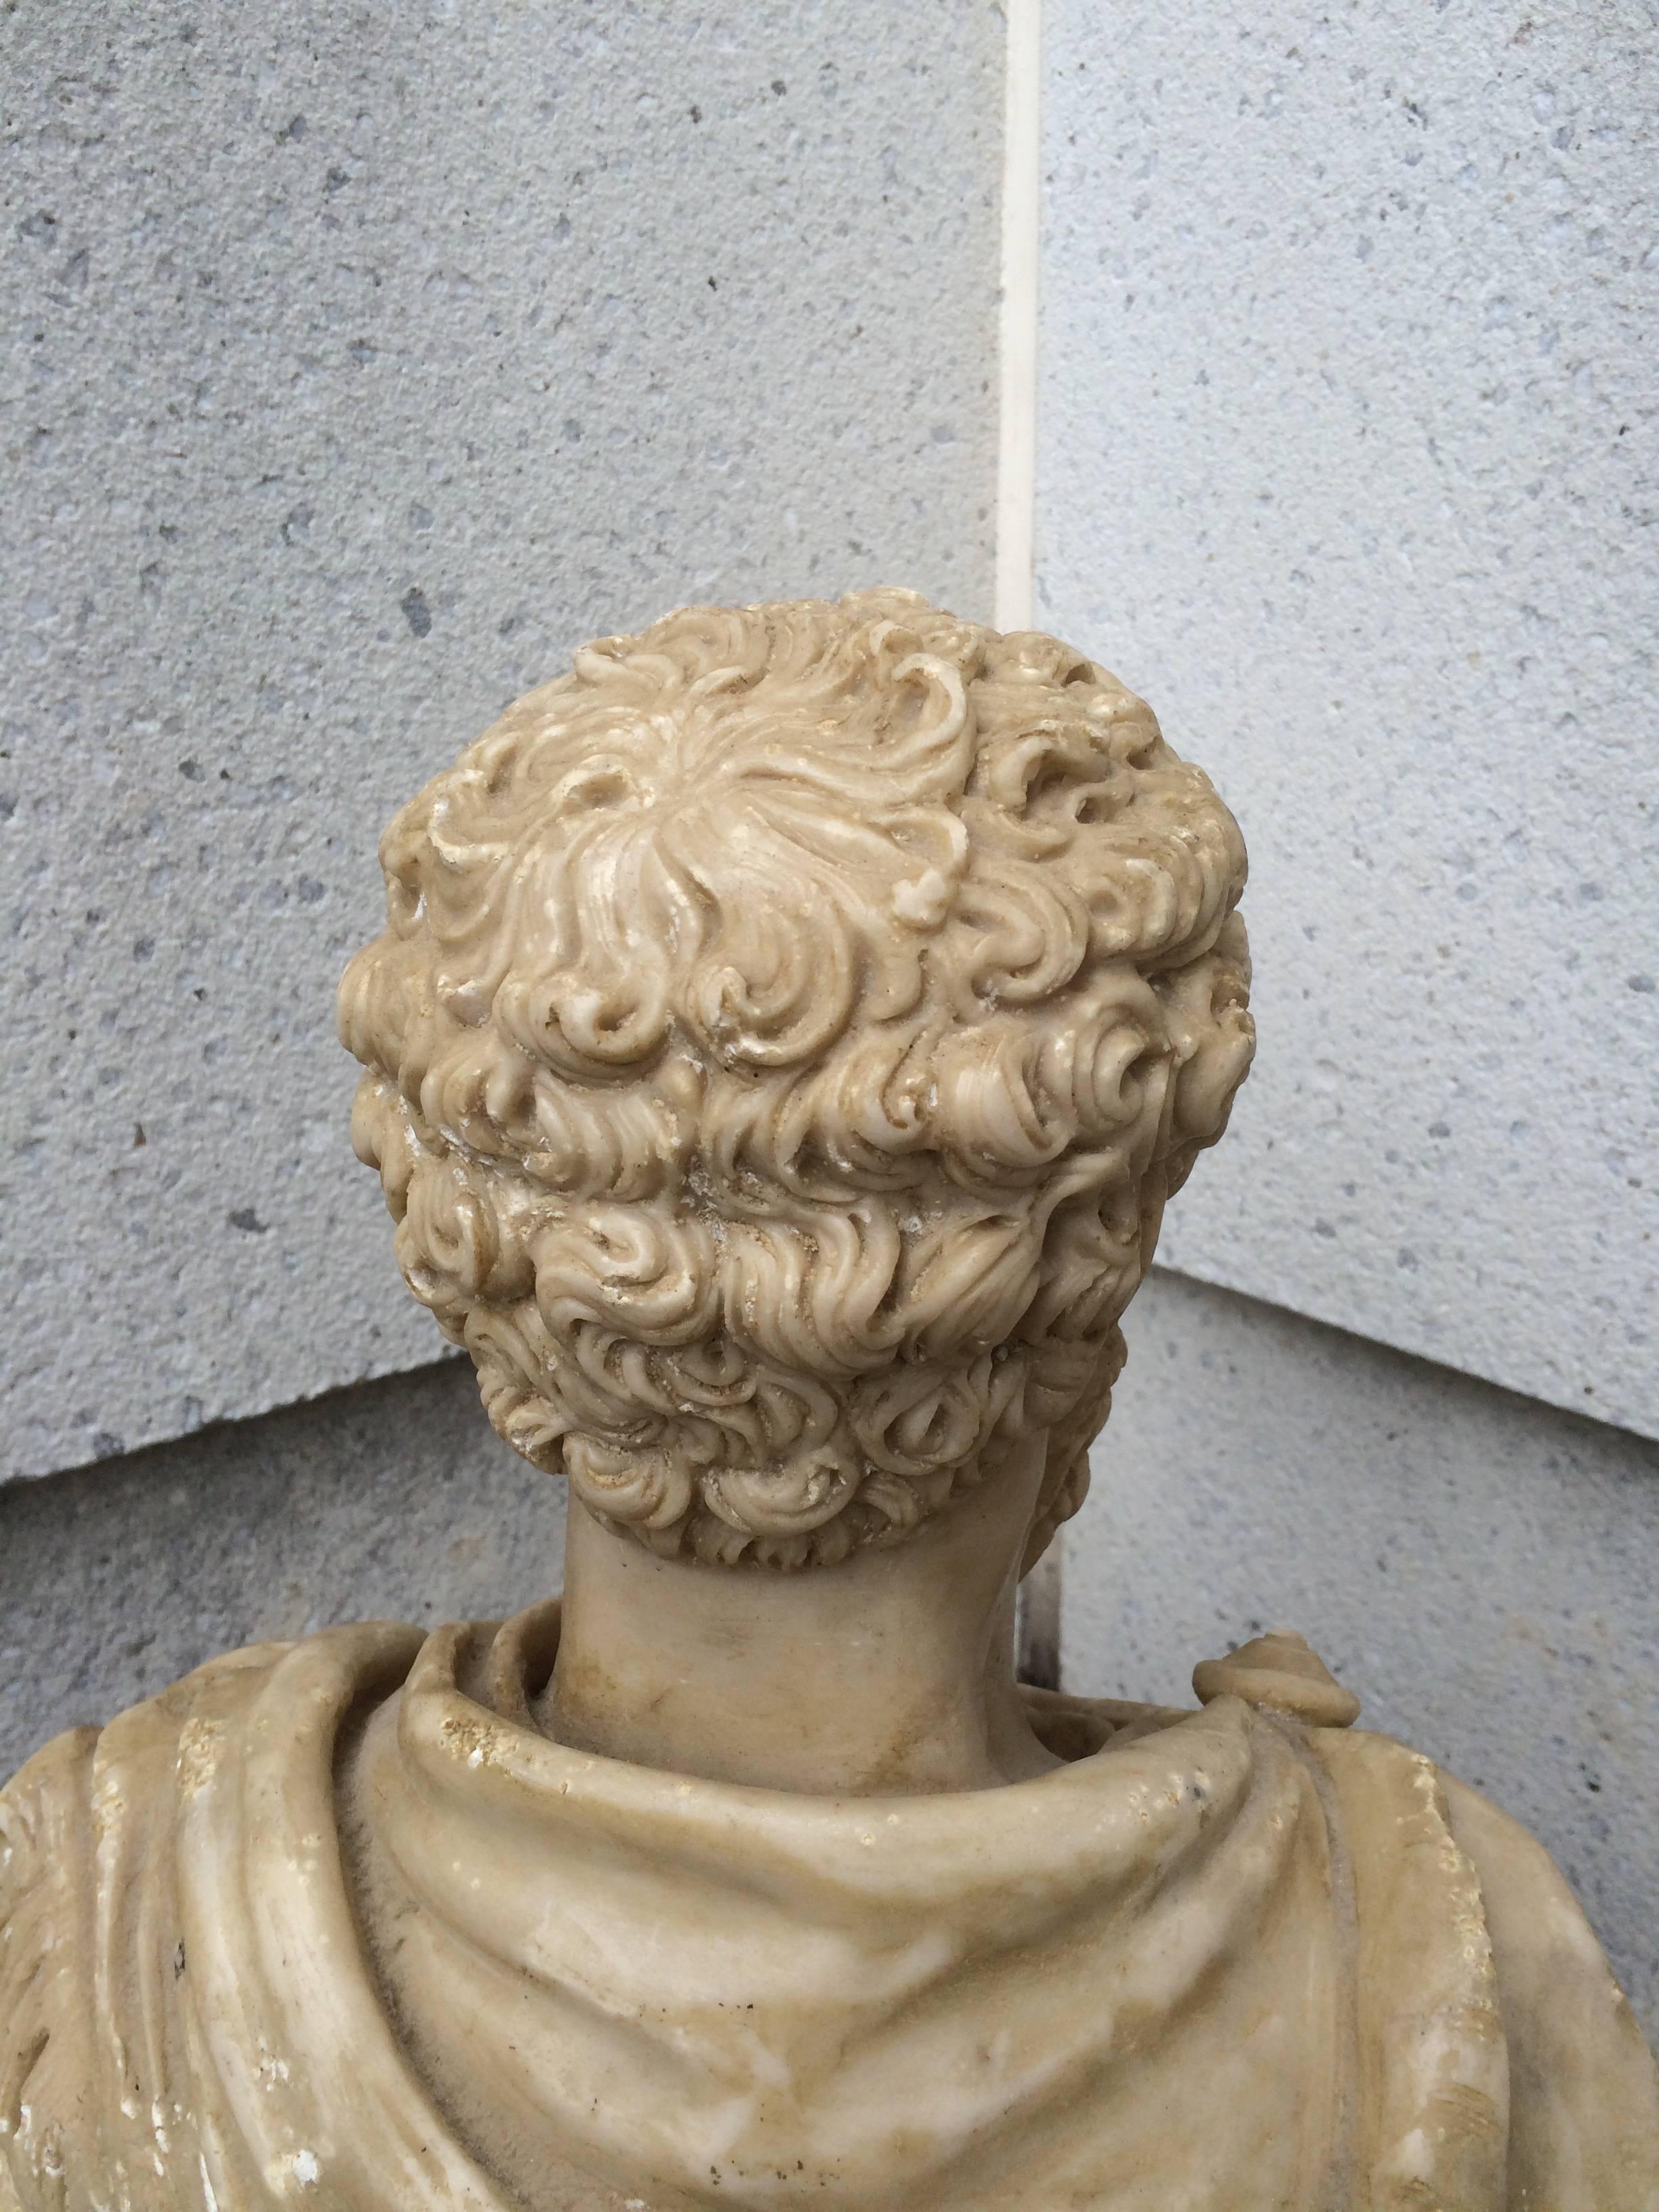 Impressive Roman composition bust of Marcus Aurelius on a painted plinth, Italian, 19th century.

Marcus Aurelius (26 April, 121-17 March, 180 AD) was Roman Emperor from 161-180. He ruled with Lucius Verus as co-emperor from 161 until Verus' death